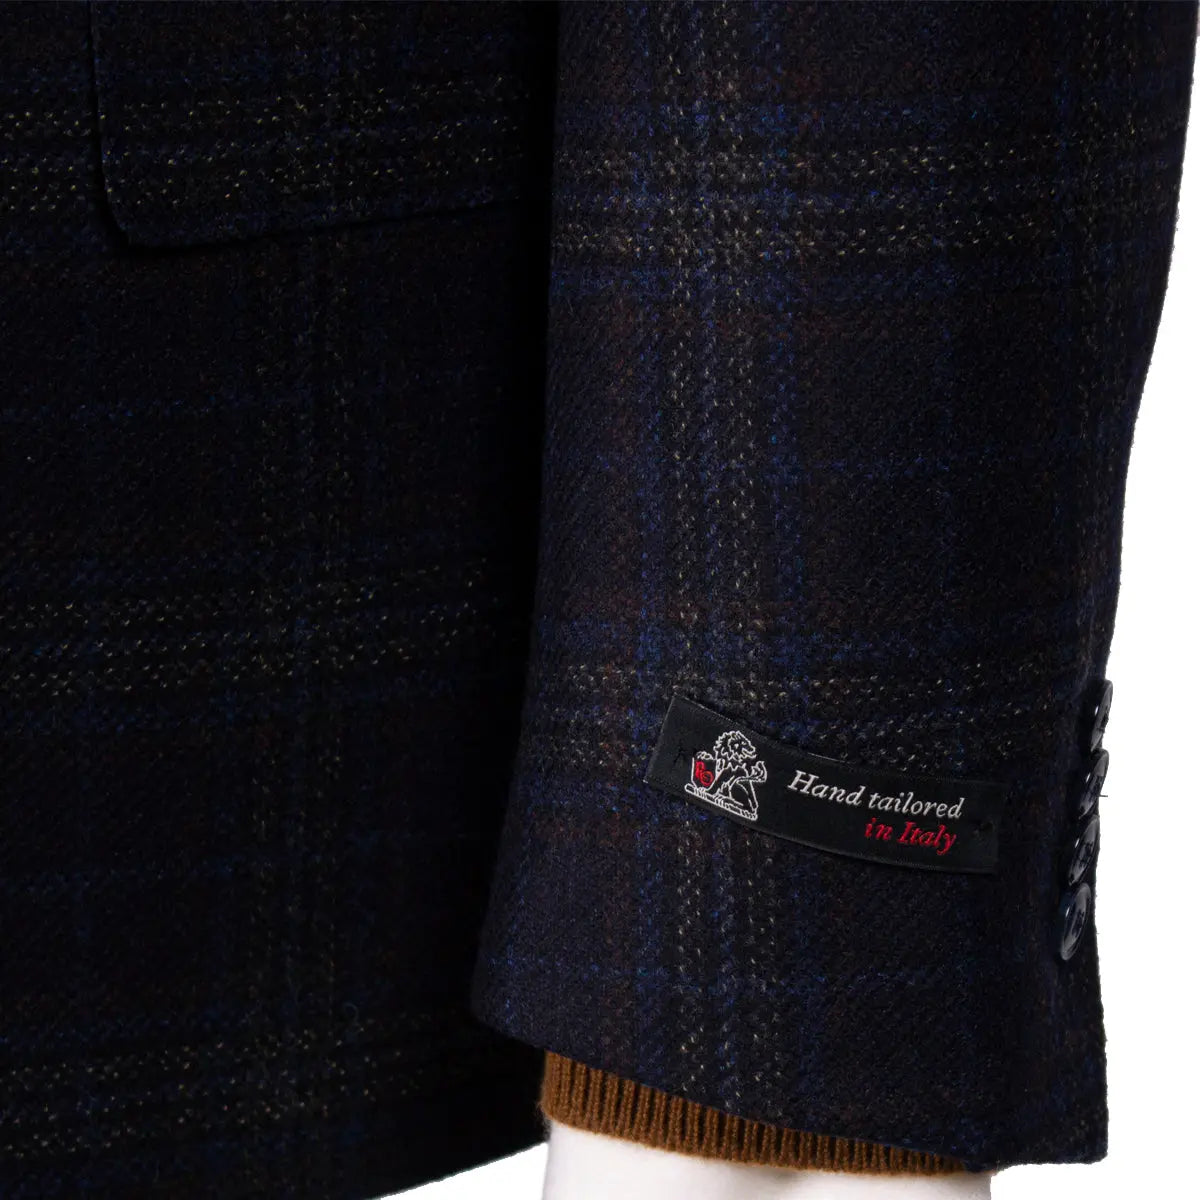 Navy Blue & Brown Check Wool & Cashmere Jacket  Robert Old   